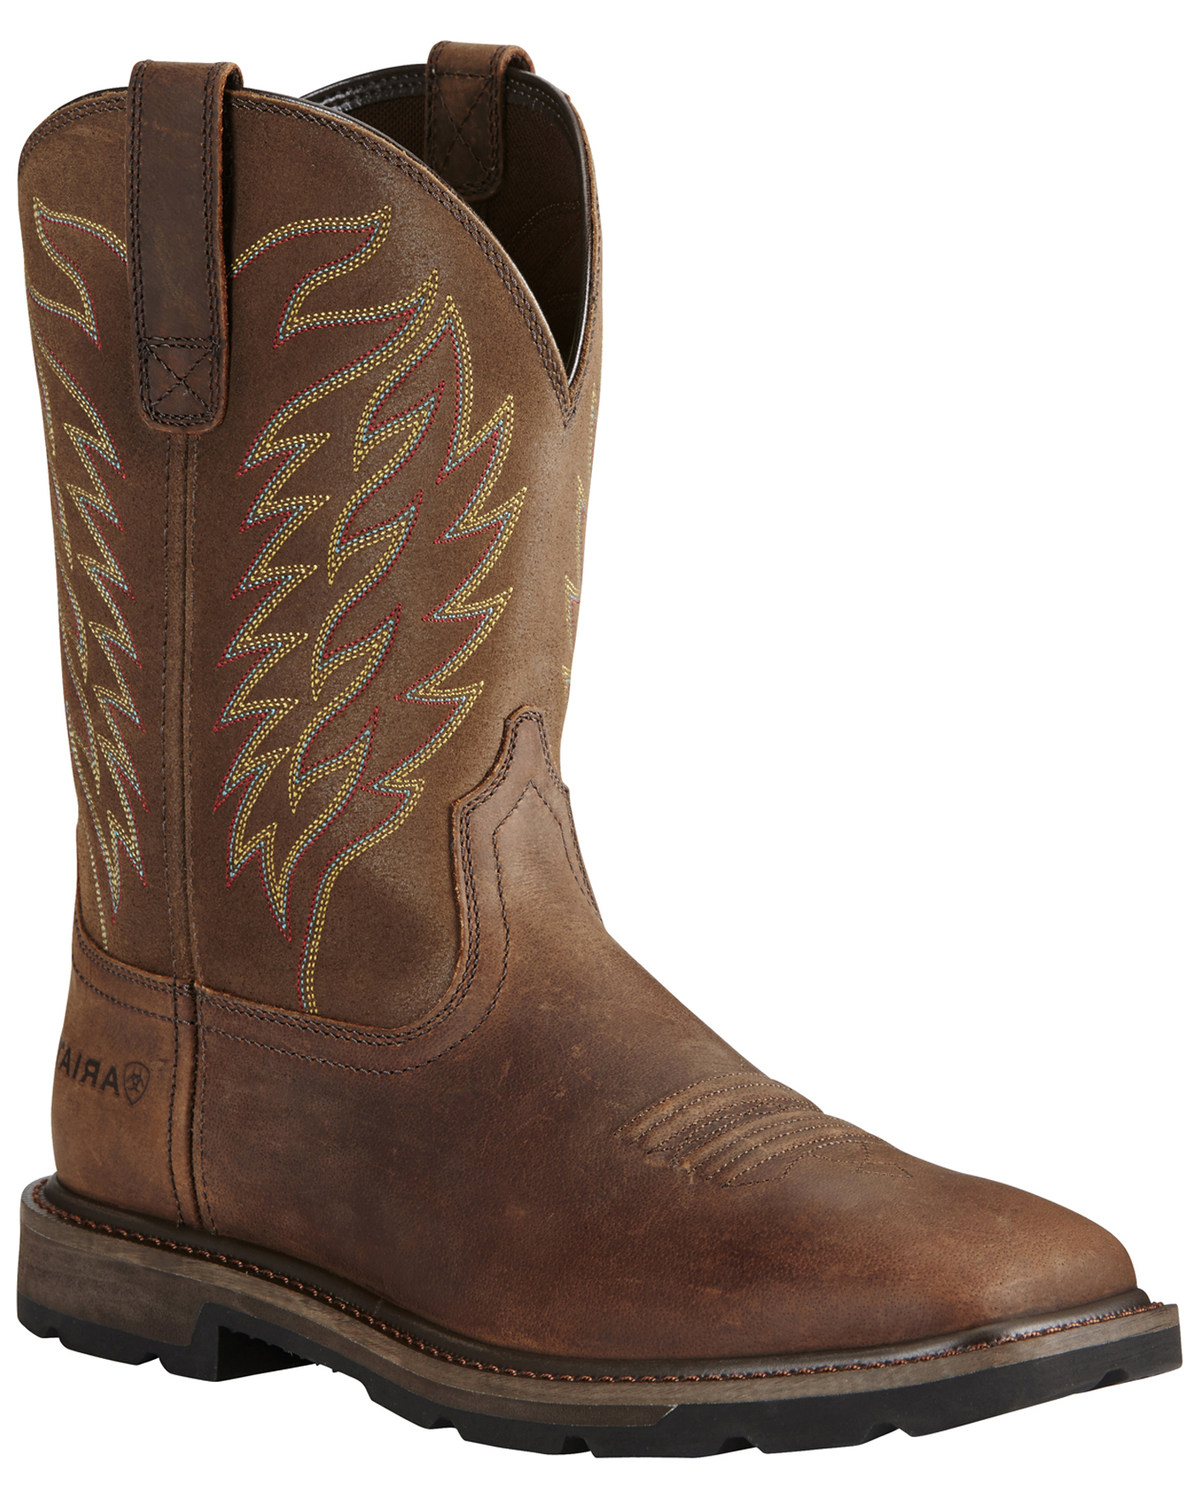 Details about   Ariat Men's Groundbreaker Pull-On Work Boot 10020064 10" shaft /Soft toe $130 